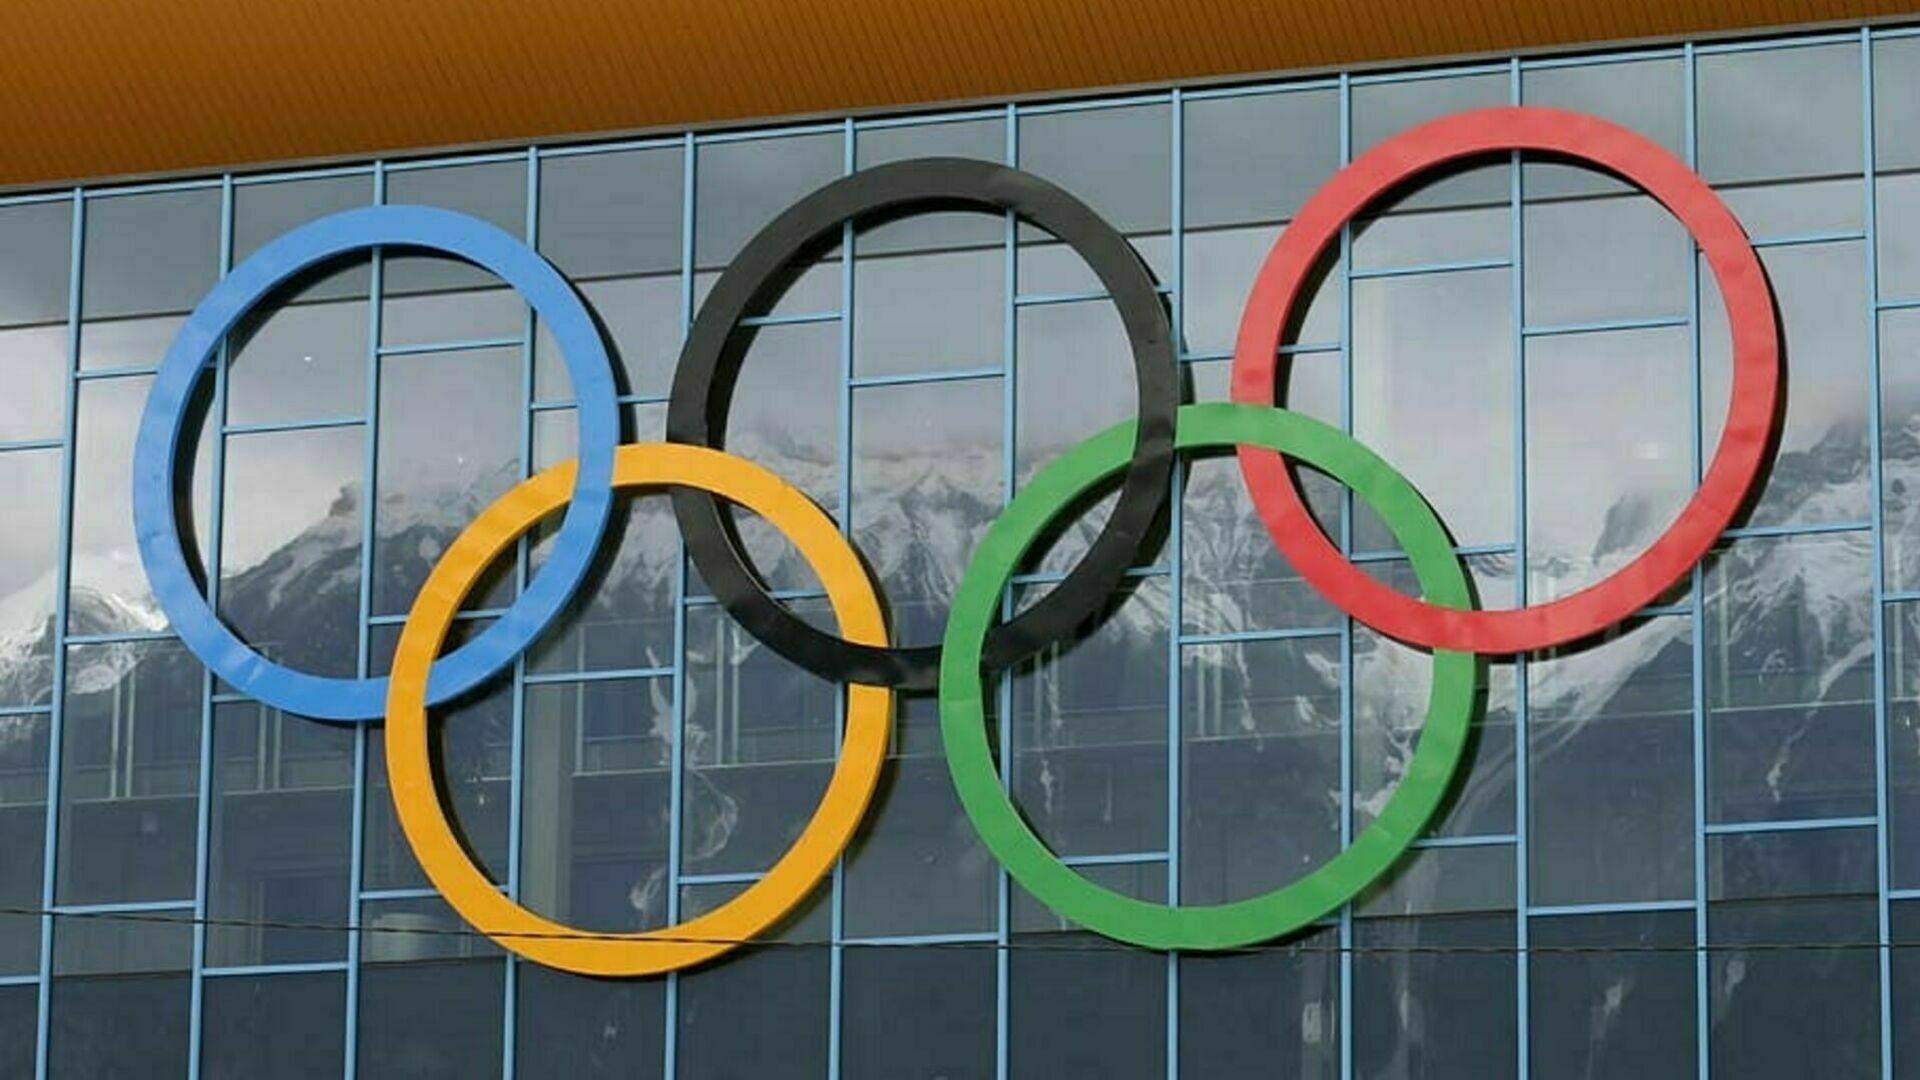 More than 30 countries opposed the participation of Russian athletes in the Olympics